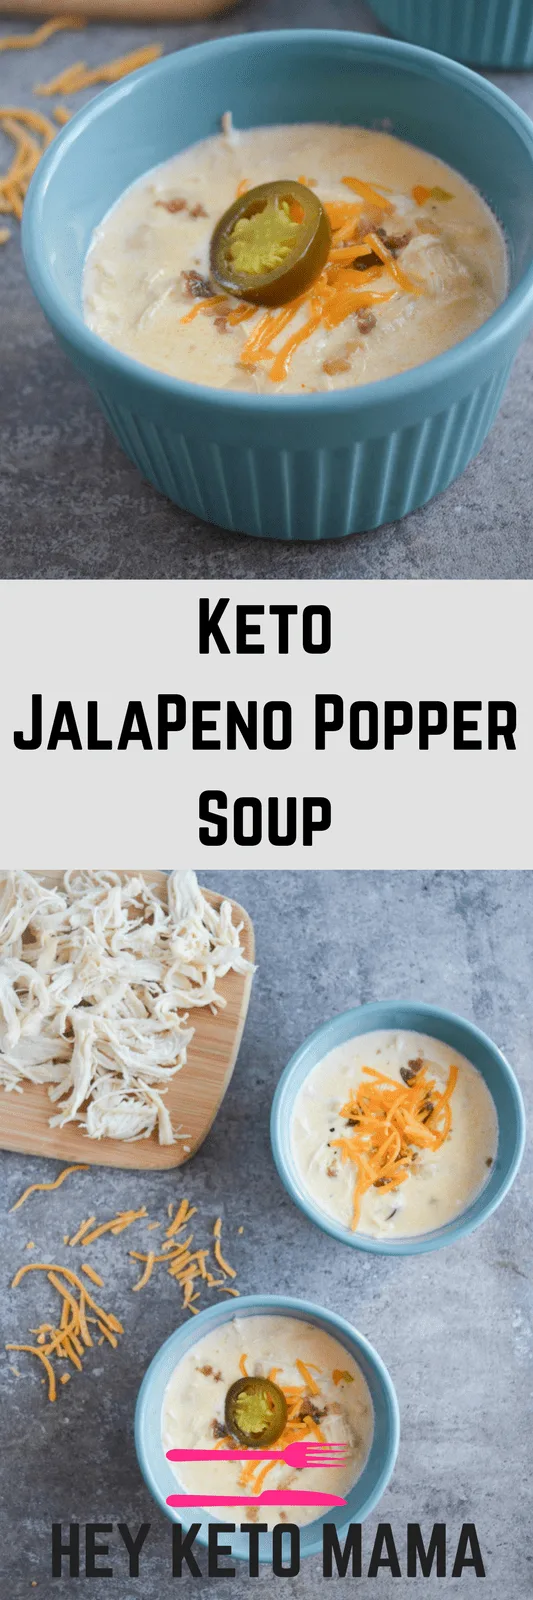 This Keto Jalapeno Popper Soup will soon become your family's favorite low carb comfort food. It's packed with savory flavor and just the right amount of kick. Be sure to make at least a double batch for leftovers!